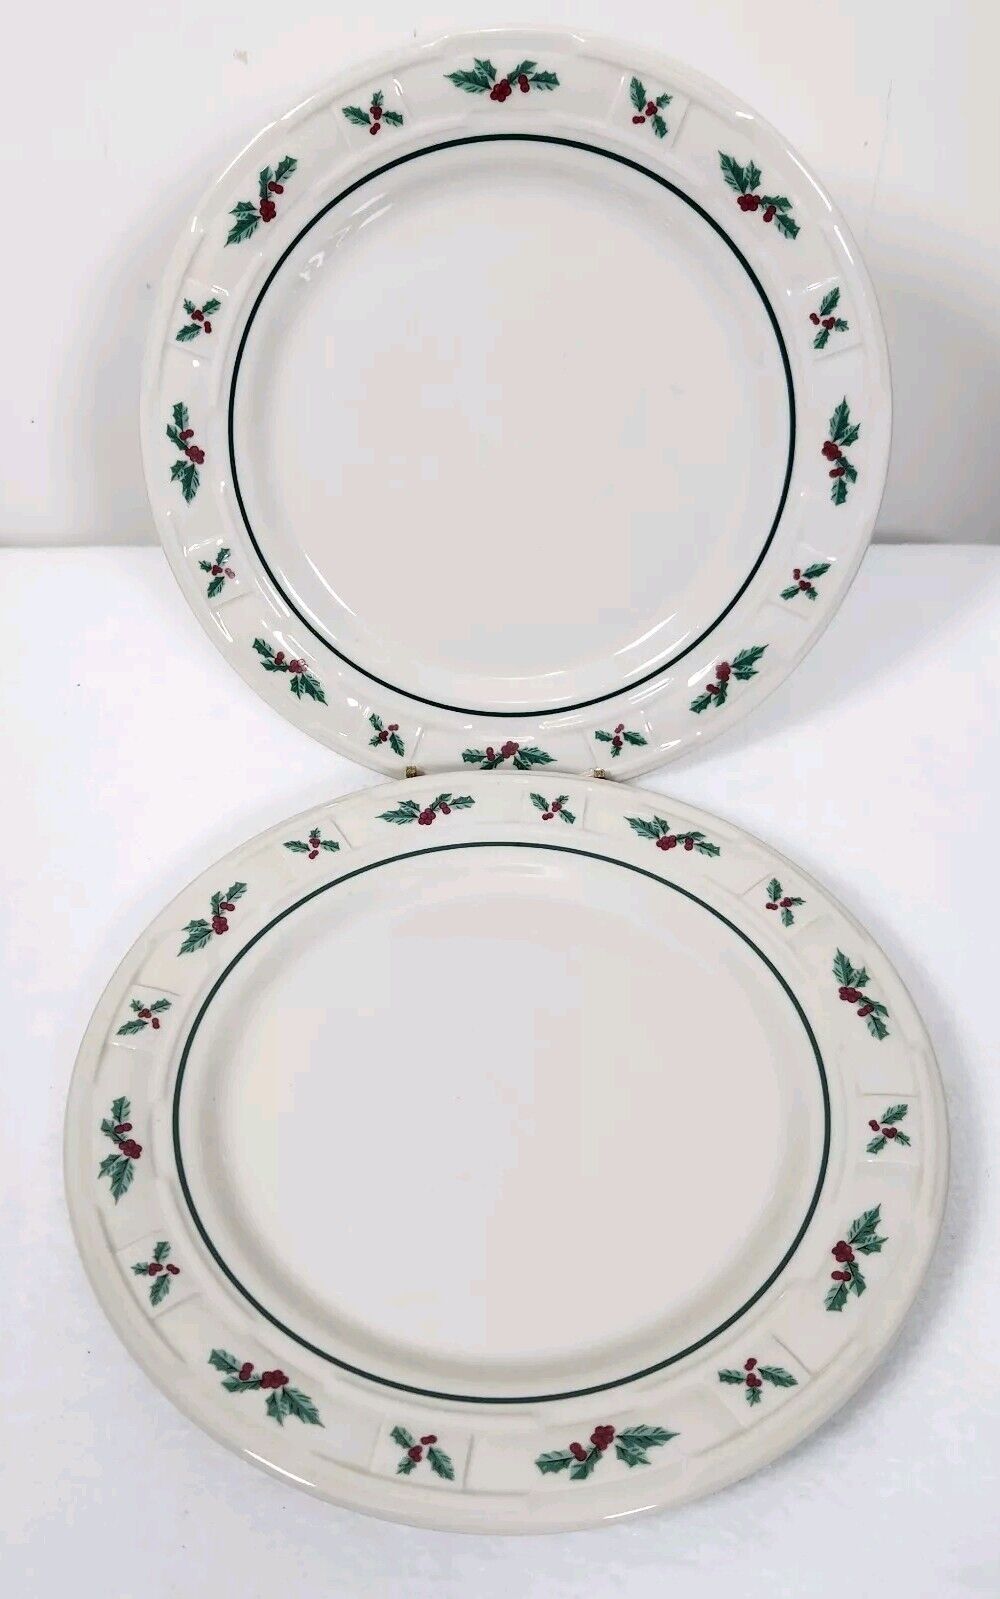 Longaberger 2005 Pottery Woven Traditions Holly (2) Dinner Plates CHRISTMAS USA